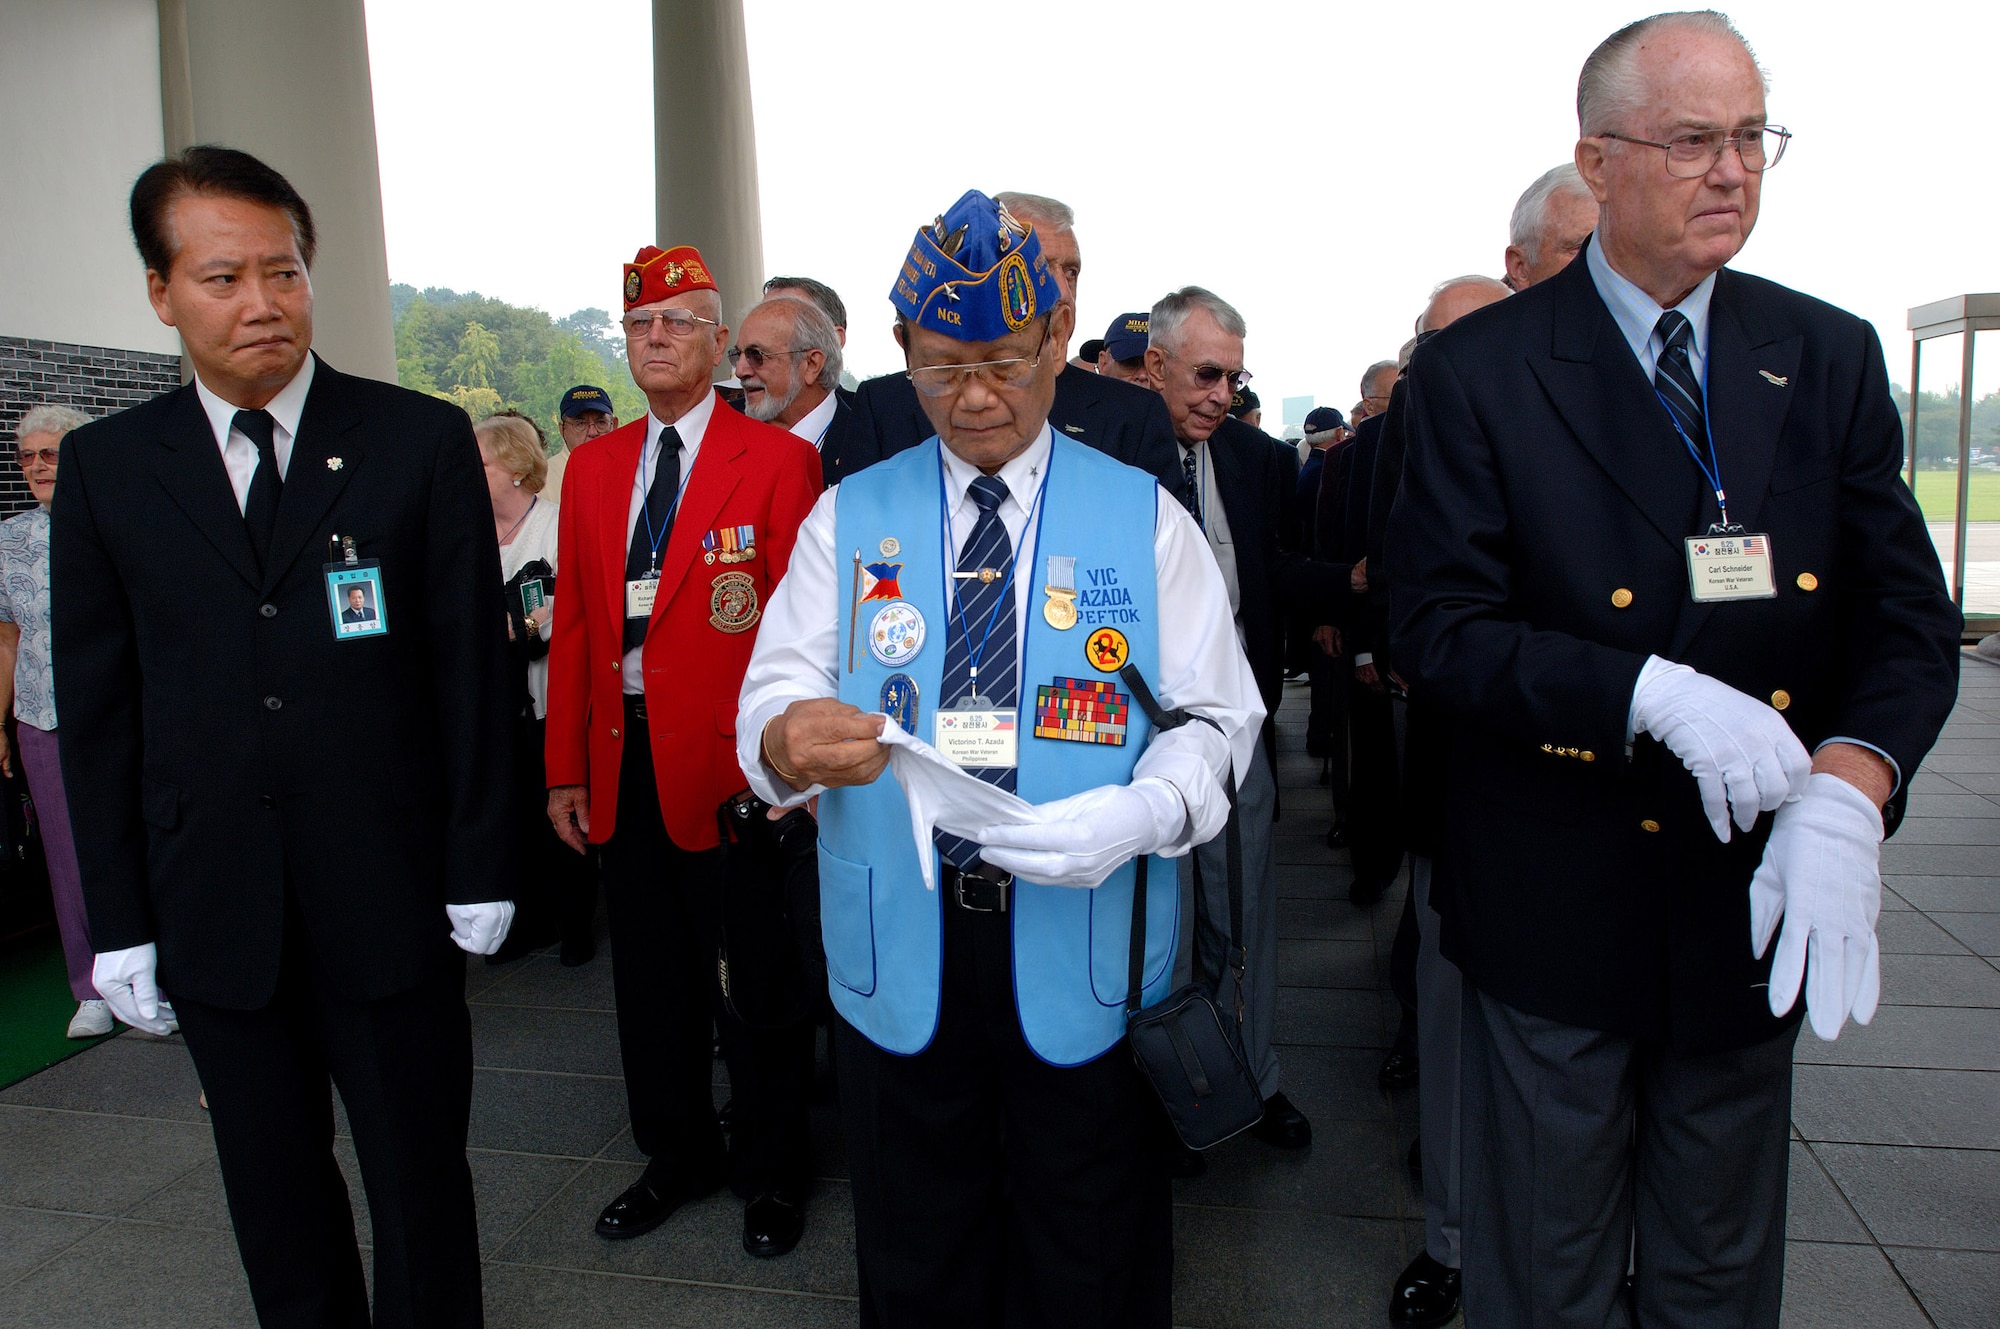 Retired Maj. Gen. Carl G. Schneider (right) and retired Philippines Gen. Vic Azada (center) prepare for a wreath-laying ceremony at the South Korean National Cemetery along with fellow Korean War veterans Sept. 12. The South Korean government's Revisit Korea program invites war veterans each year to come to South Korea to honor the men and woman from 21 countries who served during the Korean War. Nearly 25,000 veterans have participated in this program since 1975. (U.S. Air Force photo/Staff Sgt. Bennie J. Davis III) 
